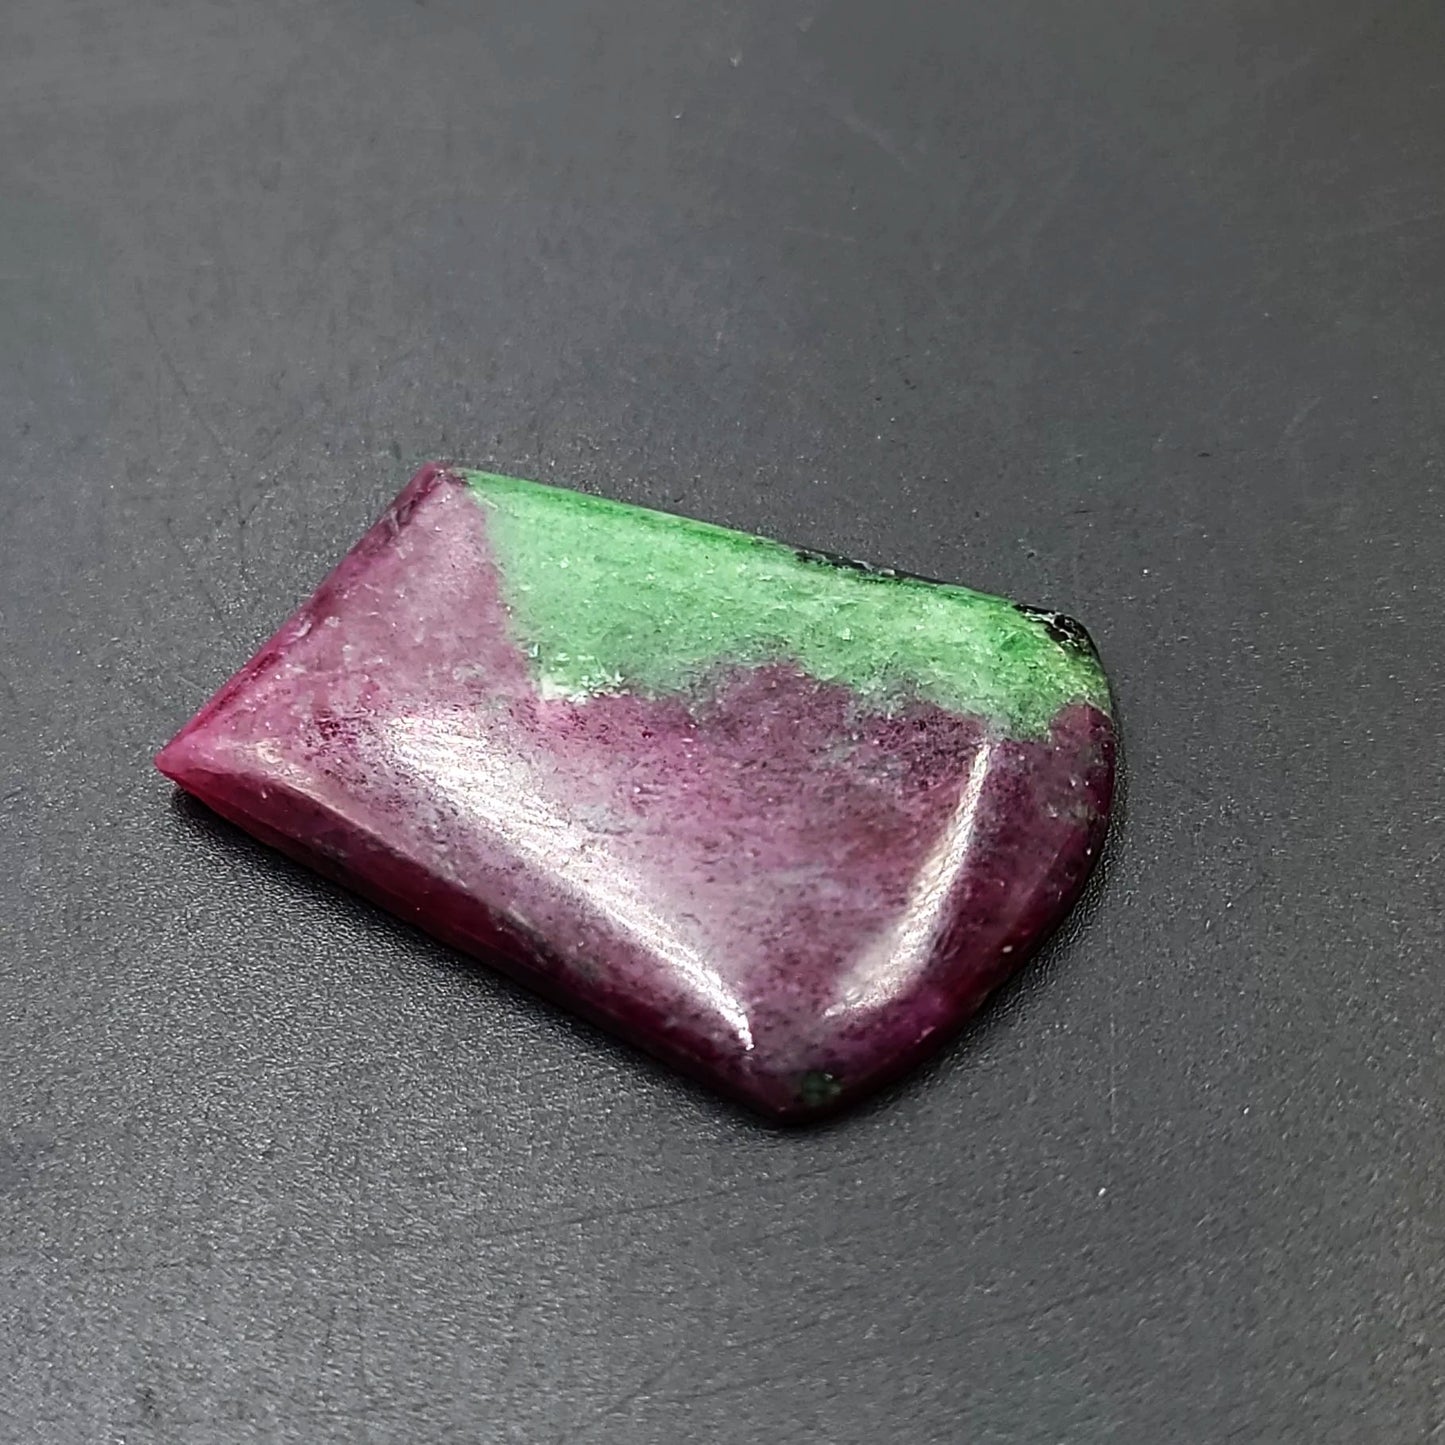 Ruby Zoisite Cabochon Free Form "Badge" Polished Cut Stone